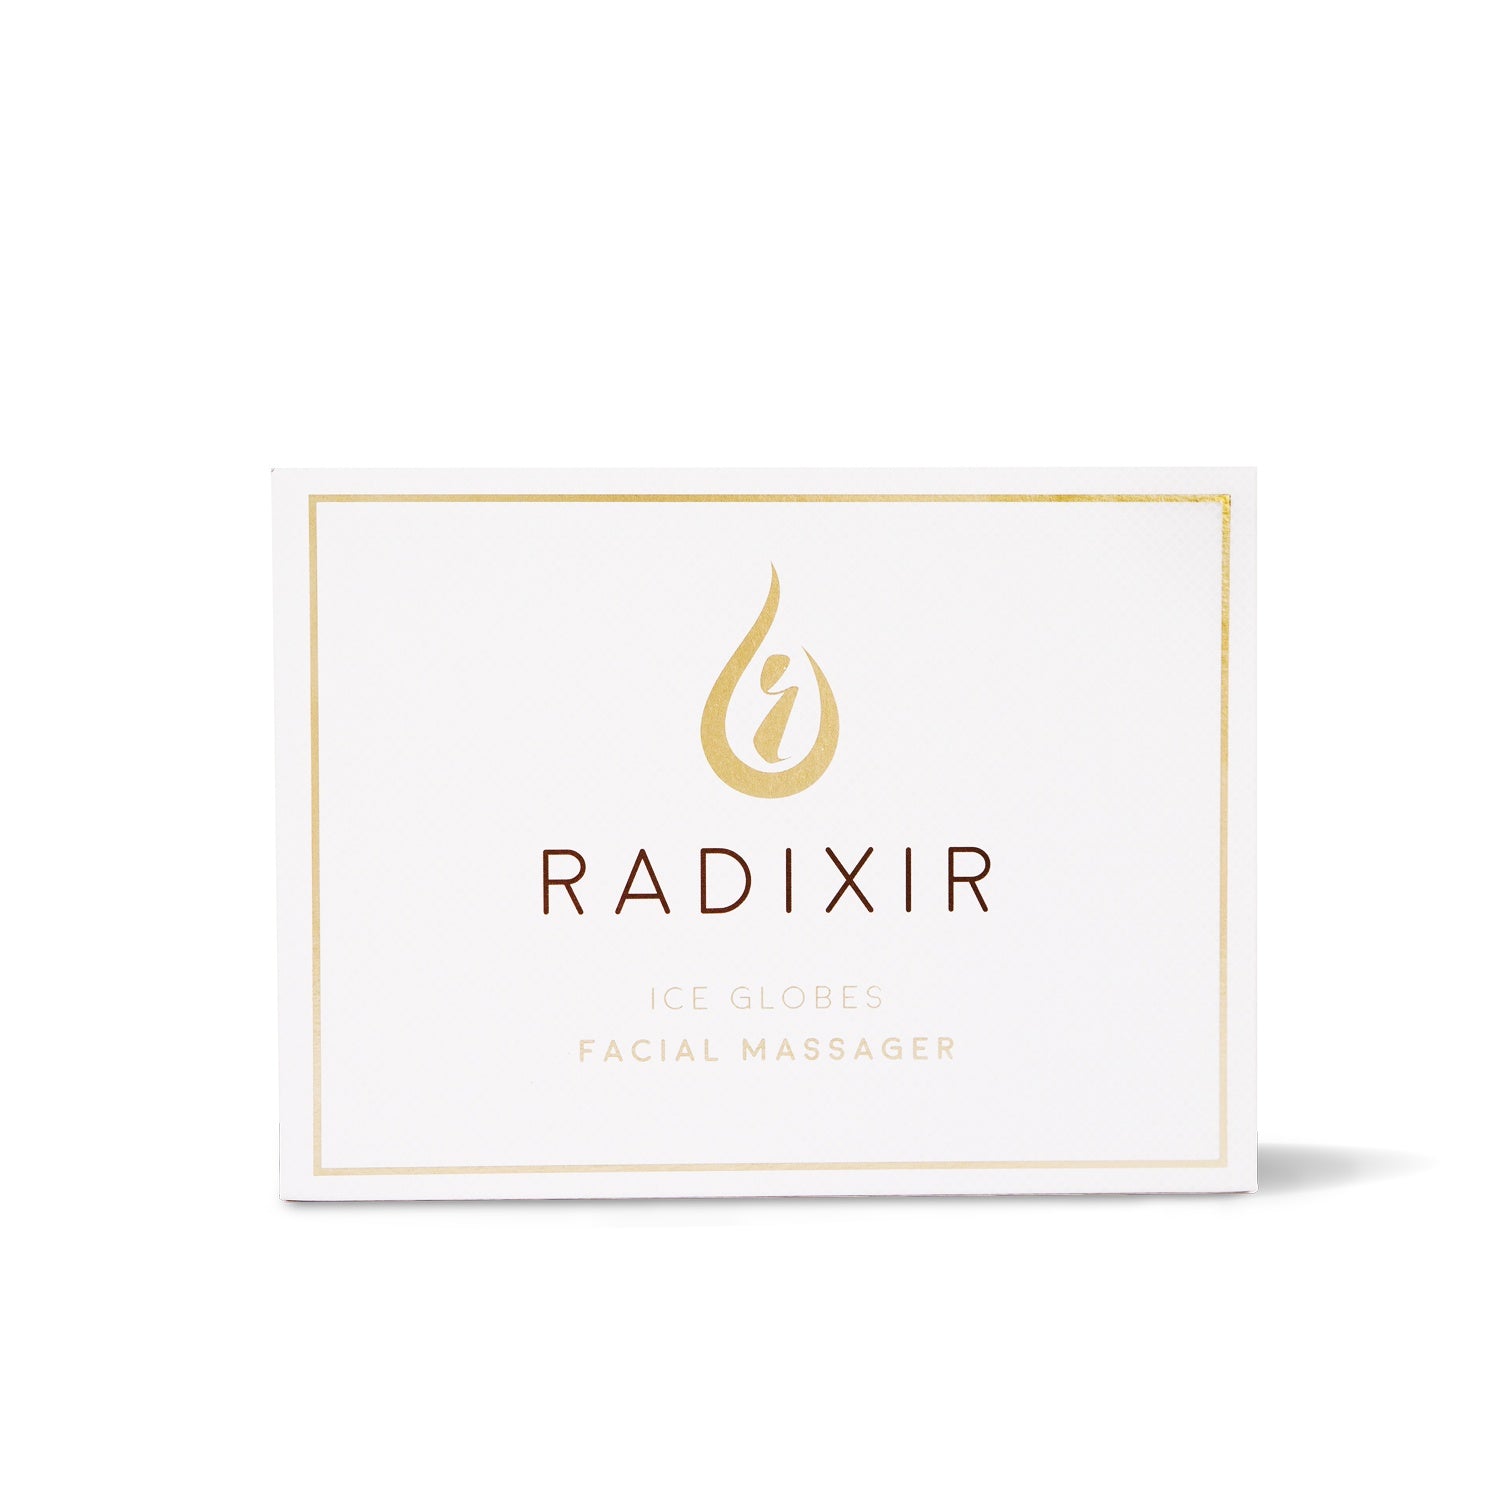 Radixir Ice Globes Outer Packaging